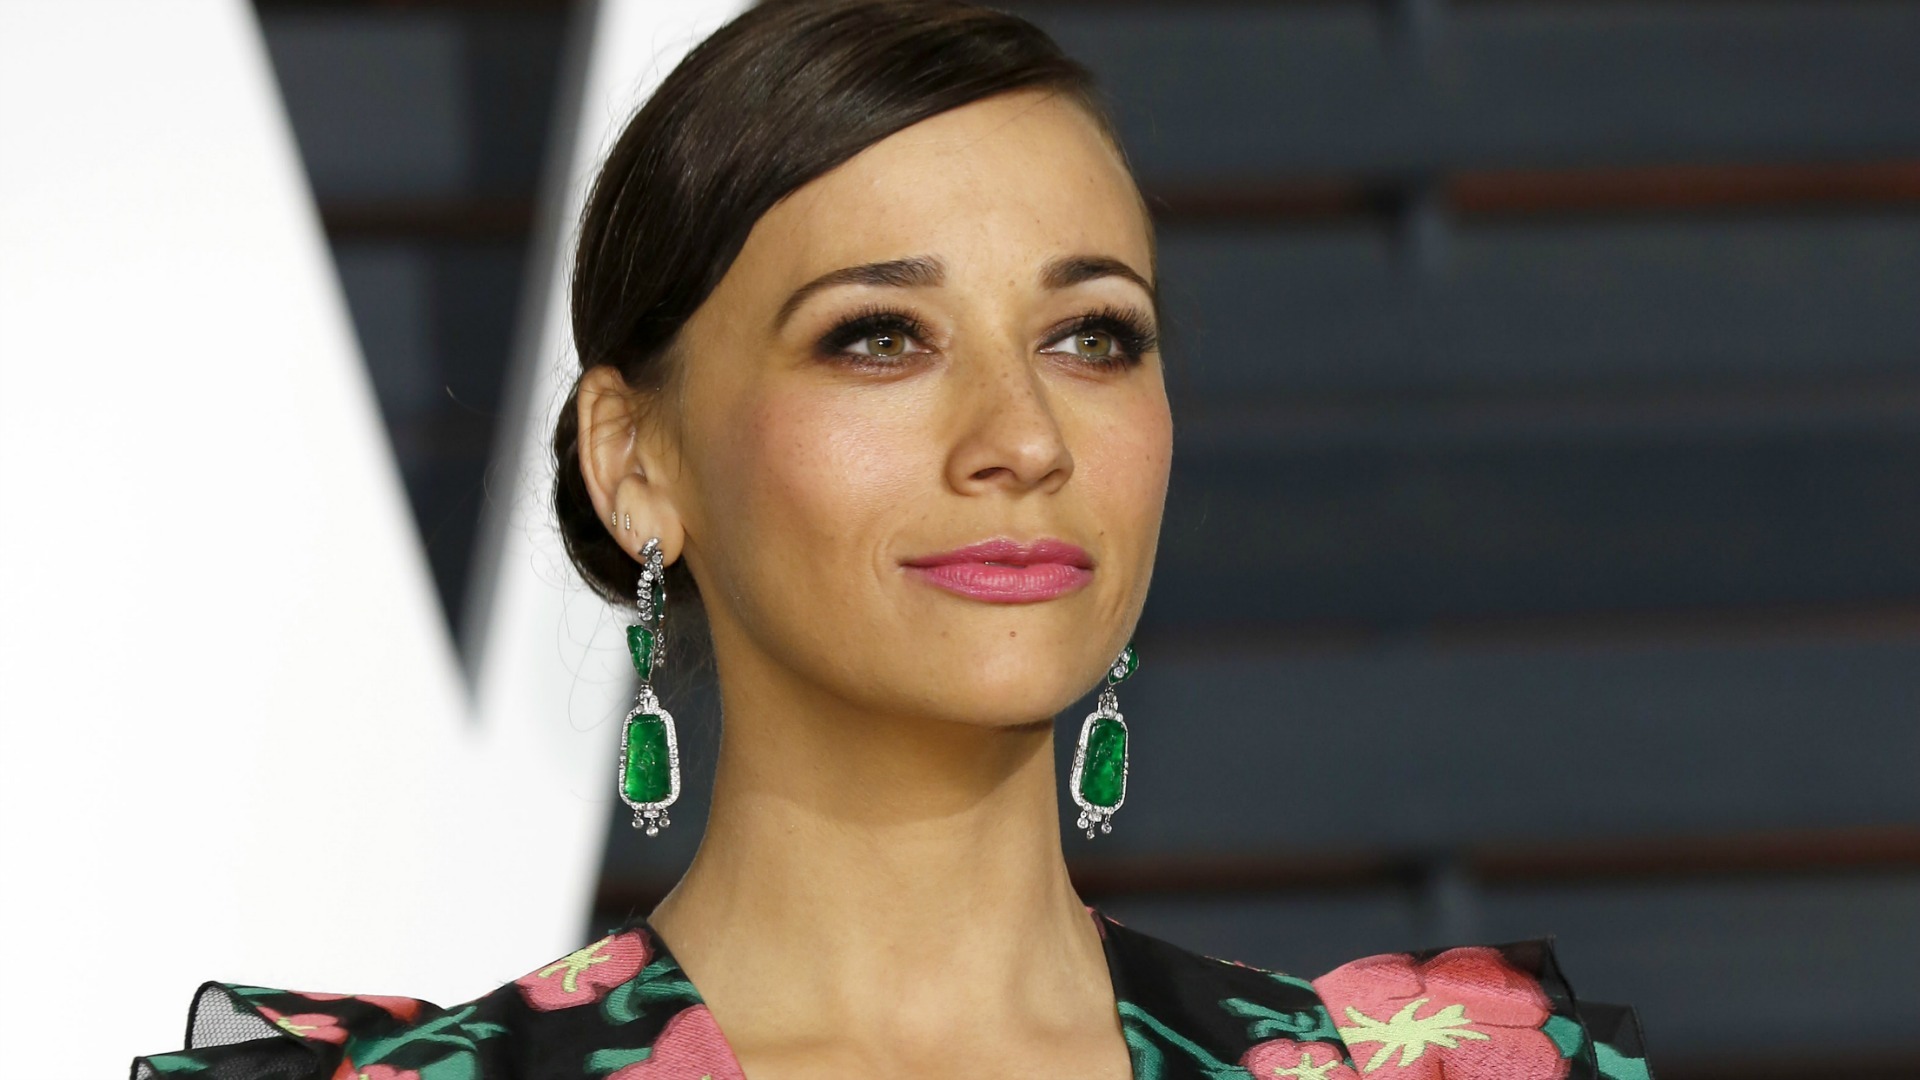 Rashida Jones Documentary Makes Me Want To Protect Young Girls From Pro